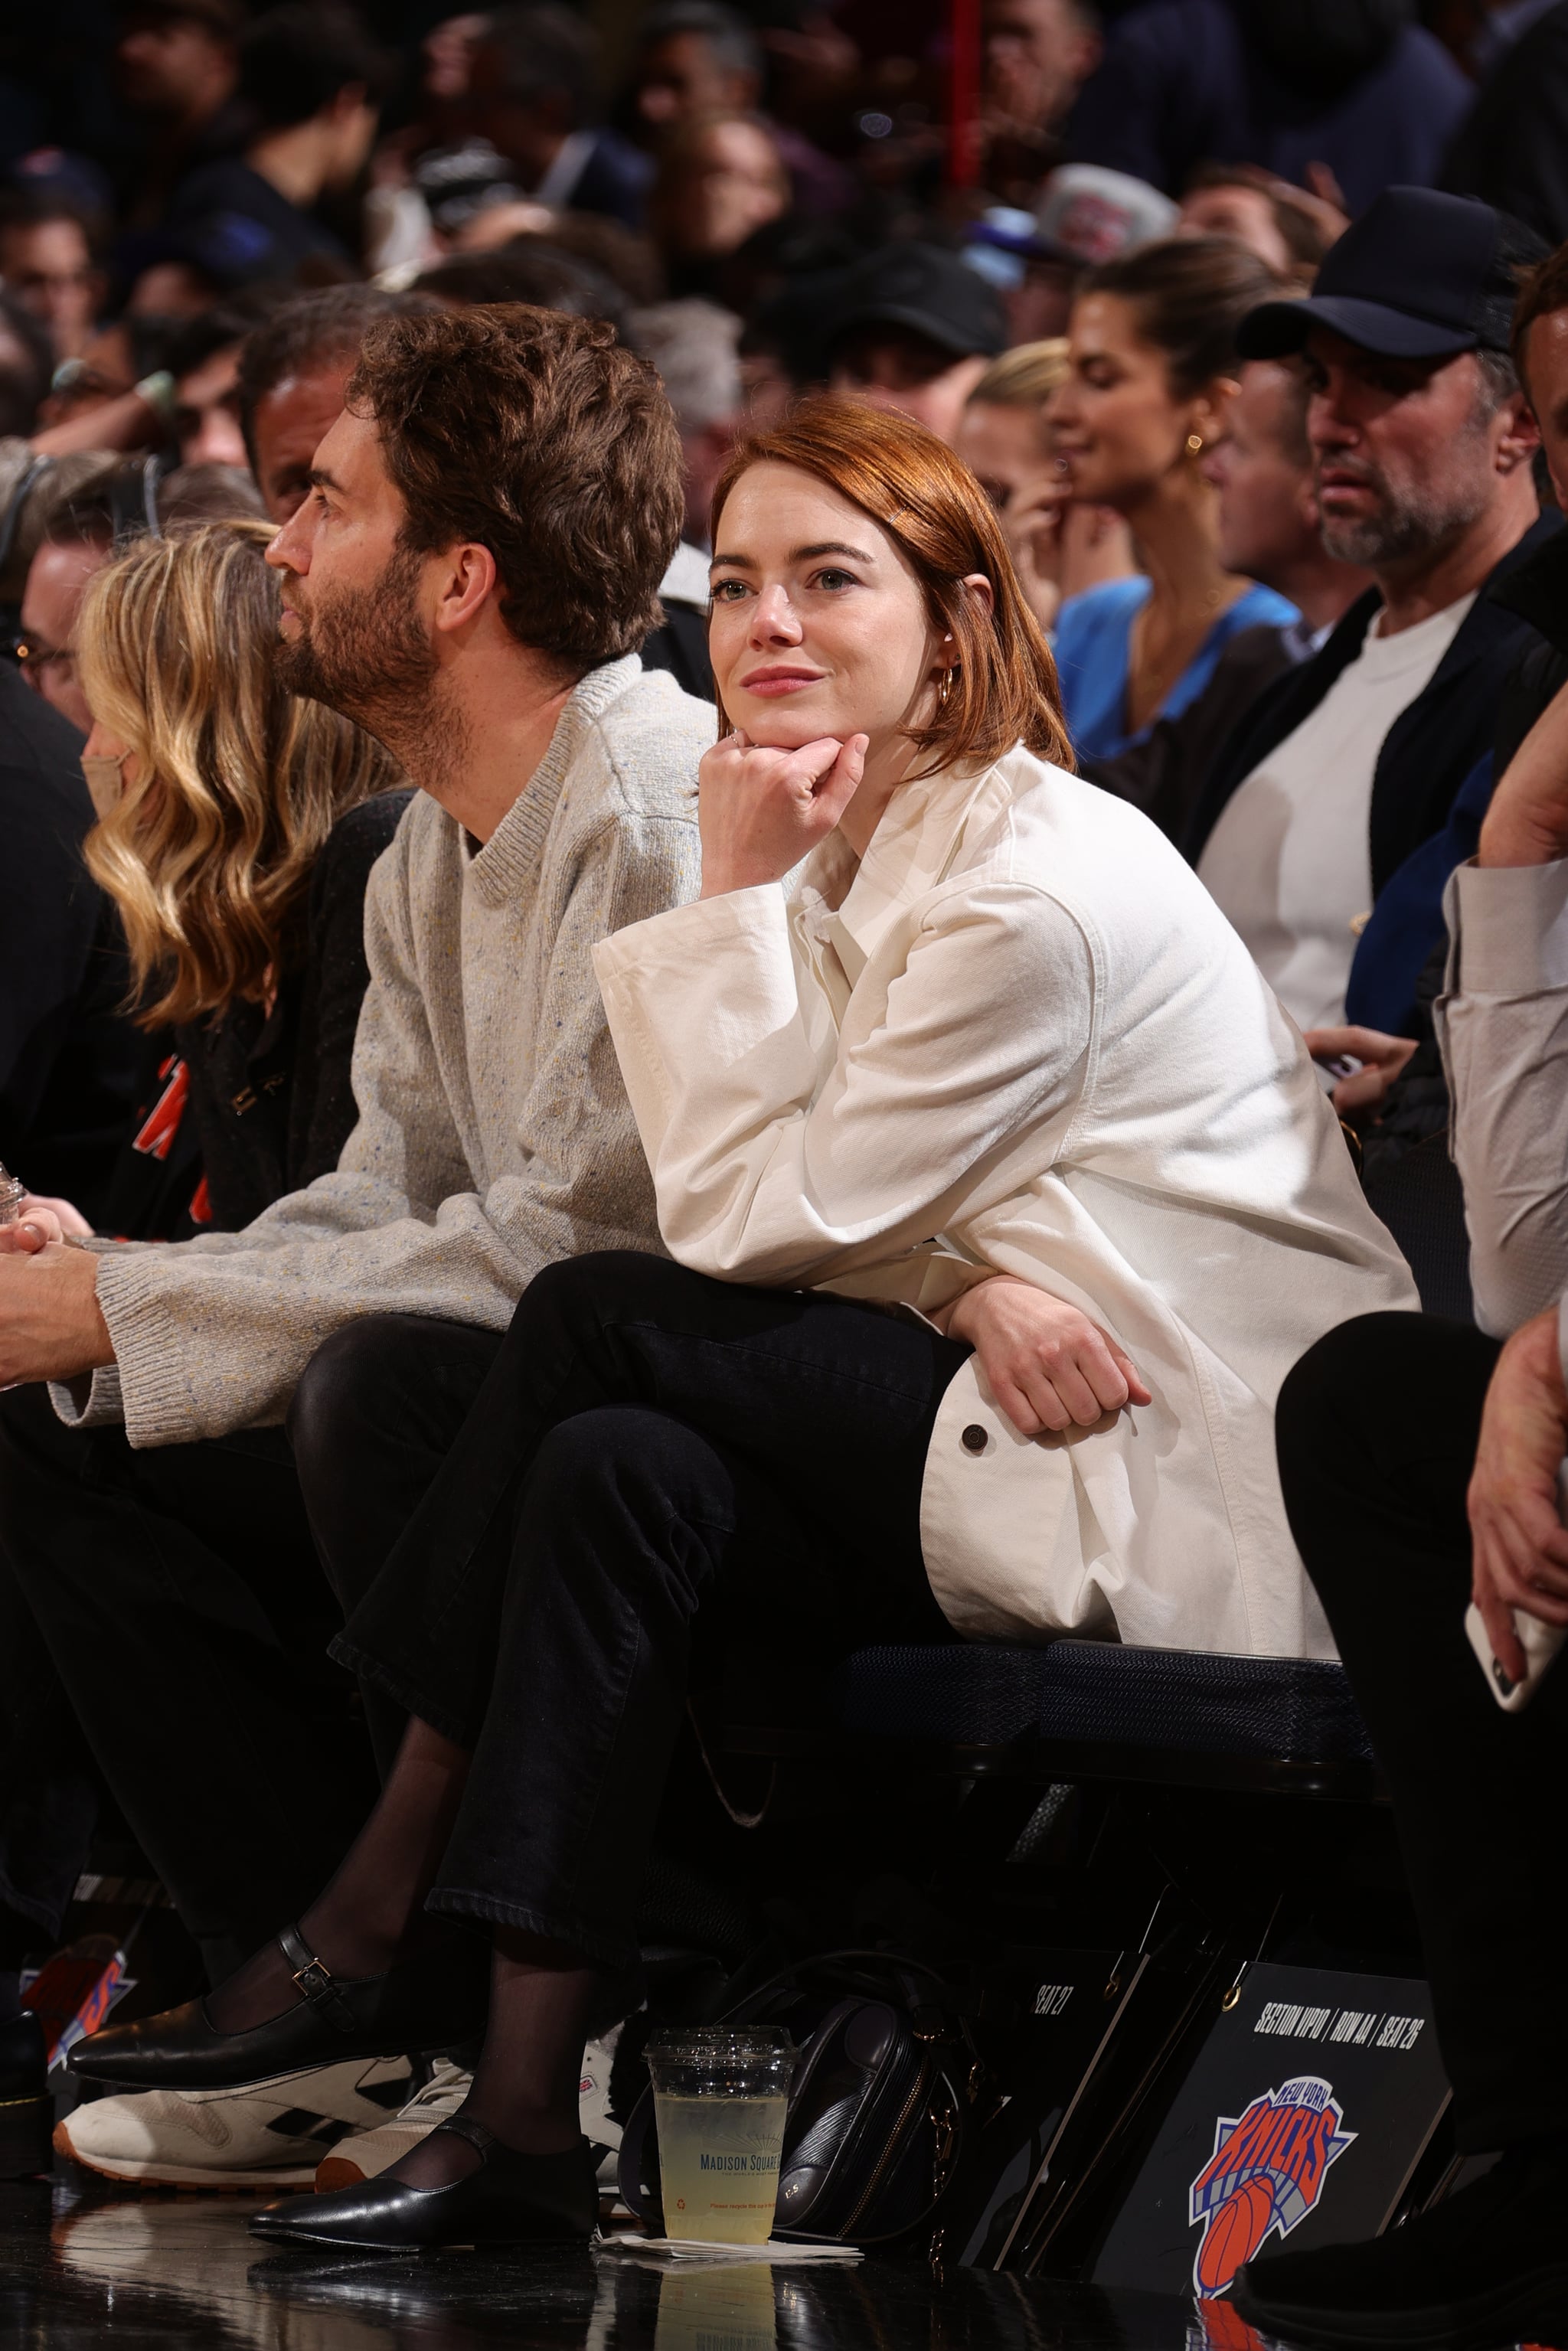 NEW YORK, NY - JANUARY 31: Emma Stone attends the game between the Los Angeles Lakers and the New York Knicks on January 31, 2023 at Madison Square Garden in New York City, New York.  NOTE TO USER: User expressly acknowledges and agrees that, by downloading and or using this photograph, User is consenting to the terms and conditions of the Getty Images License Agreement. Mandatory Copyright Notice: Copyright 2023 NBAE  (Photo by Nathaniel S. Butler/NBAE via Getty Images)